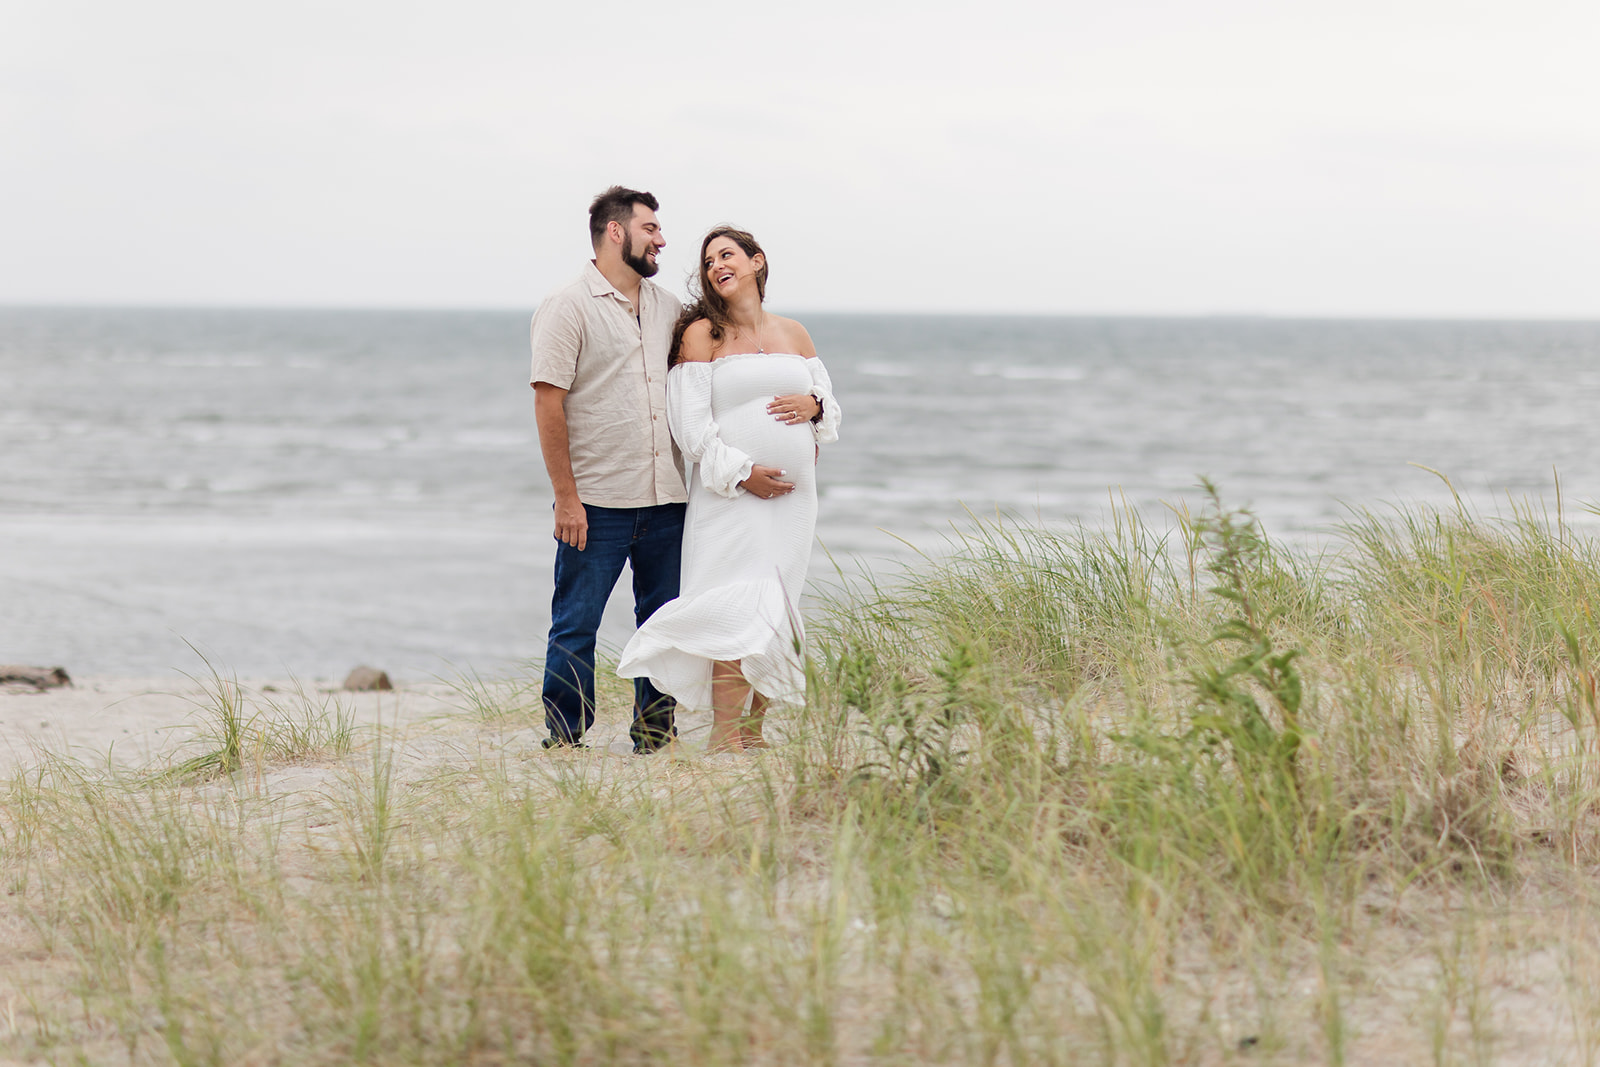 A mother to be in a white dress stands on a windy beach with her husband while laughing after visiting Yale Labor and Delivery